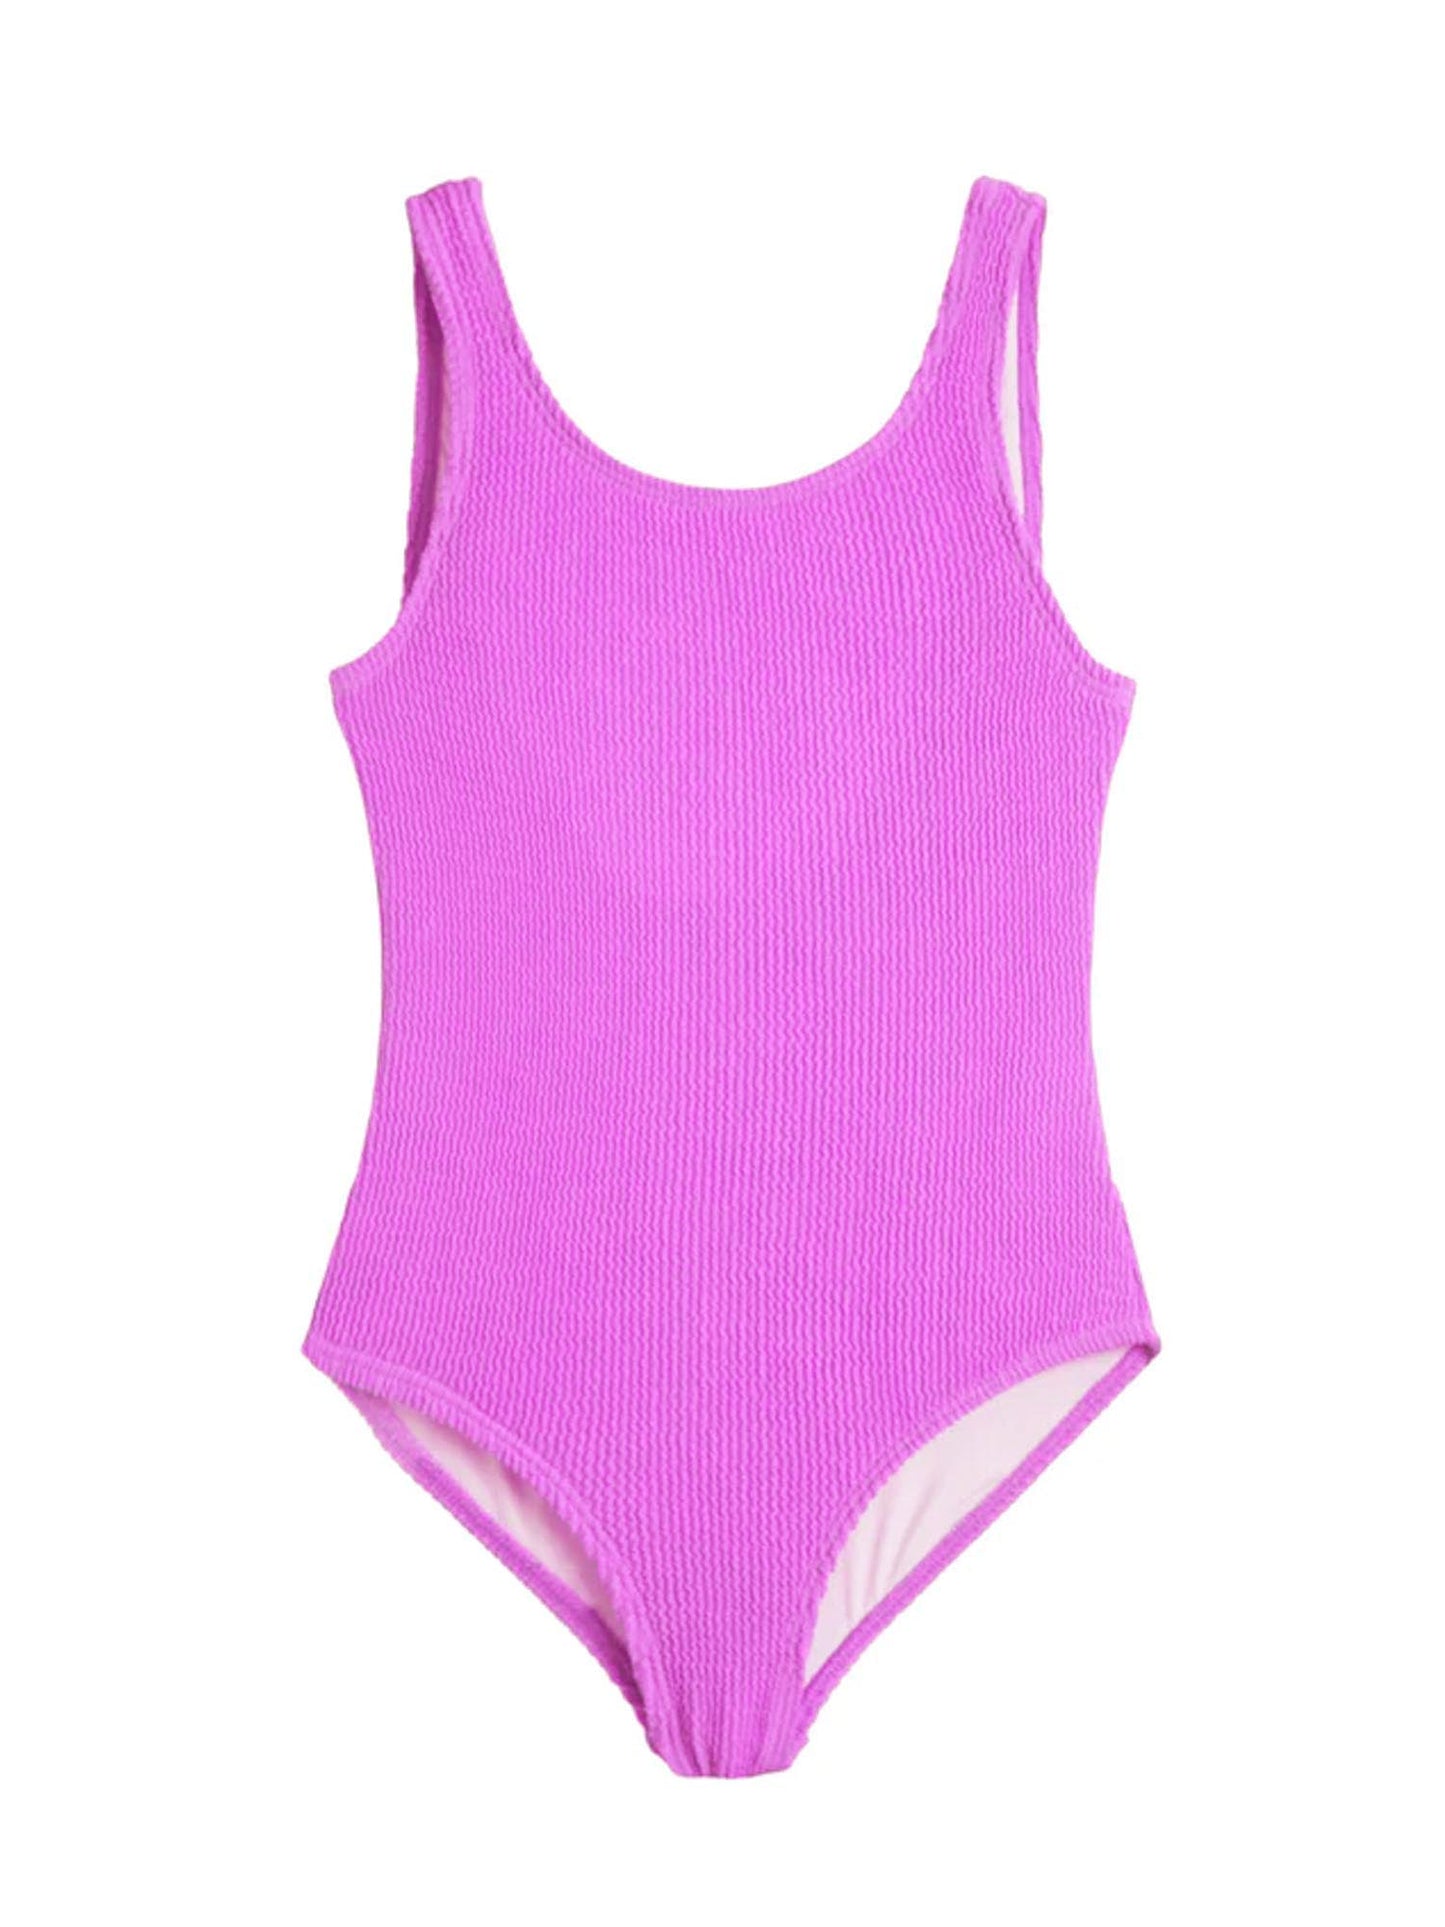 Square Neck One Piece Swimsuit with Crinkle Texture Fabric (ADDISON)